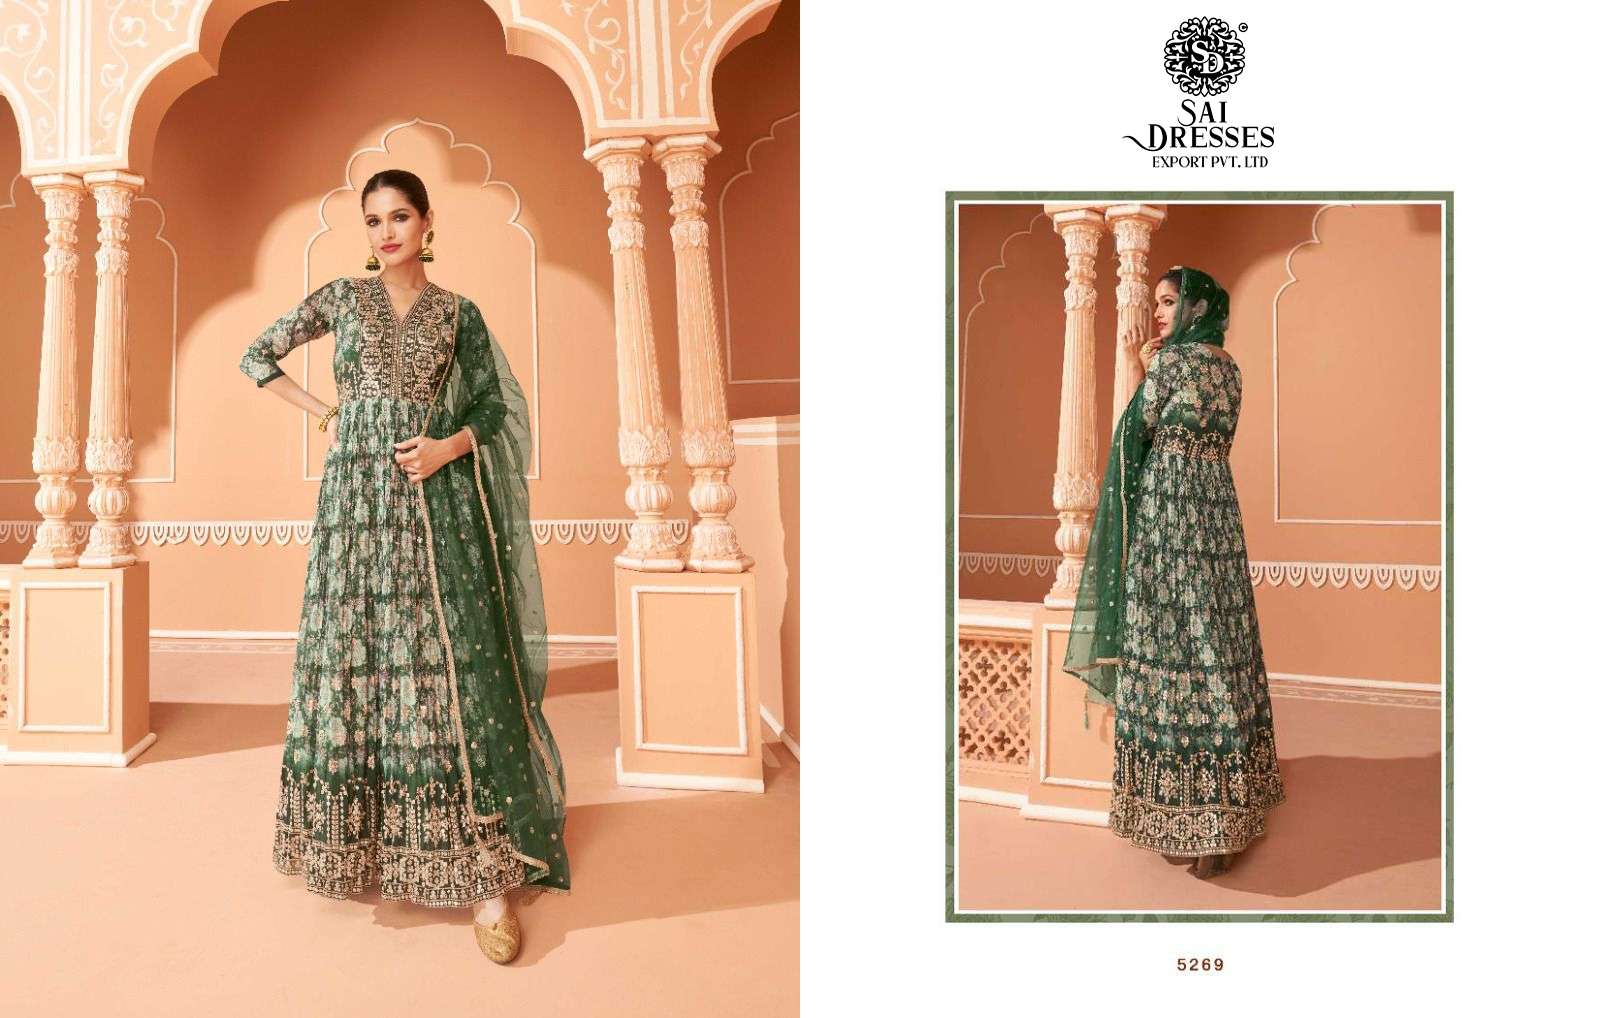 SAI DRESSES PRESENT SAHELI READYMADE PARTY WEAR DESIGNER LONG GOWN WITH DUPATTA IN WHOLESALE RATE IN SURAT